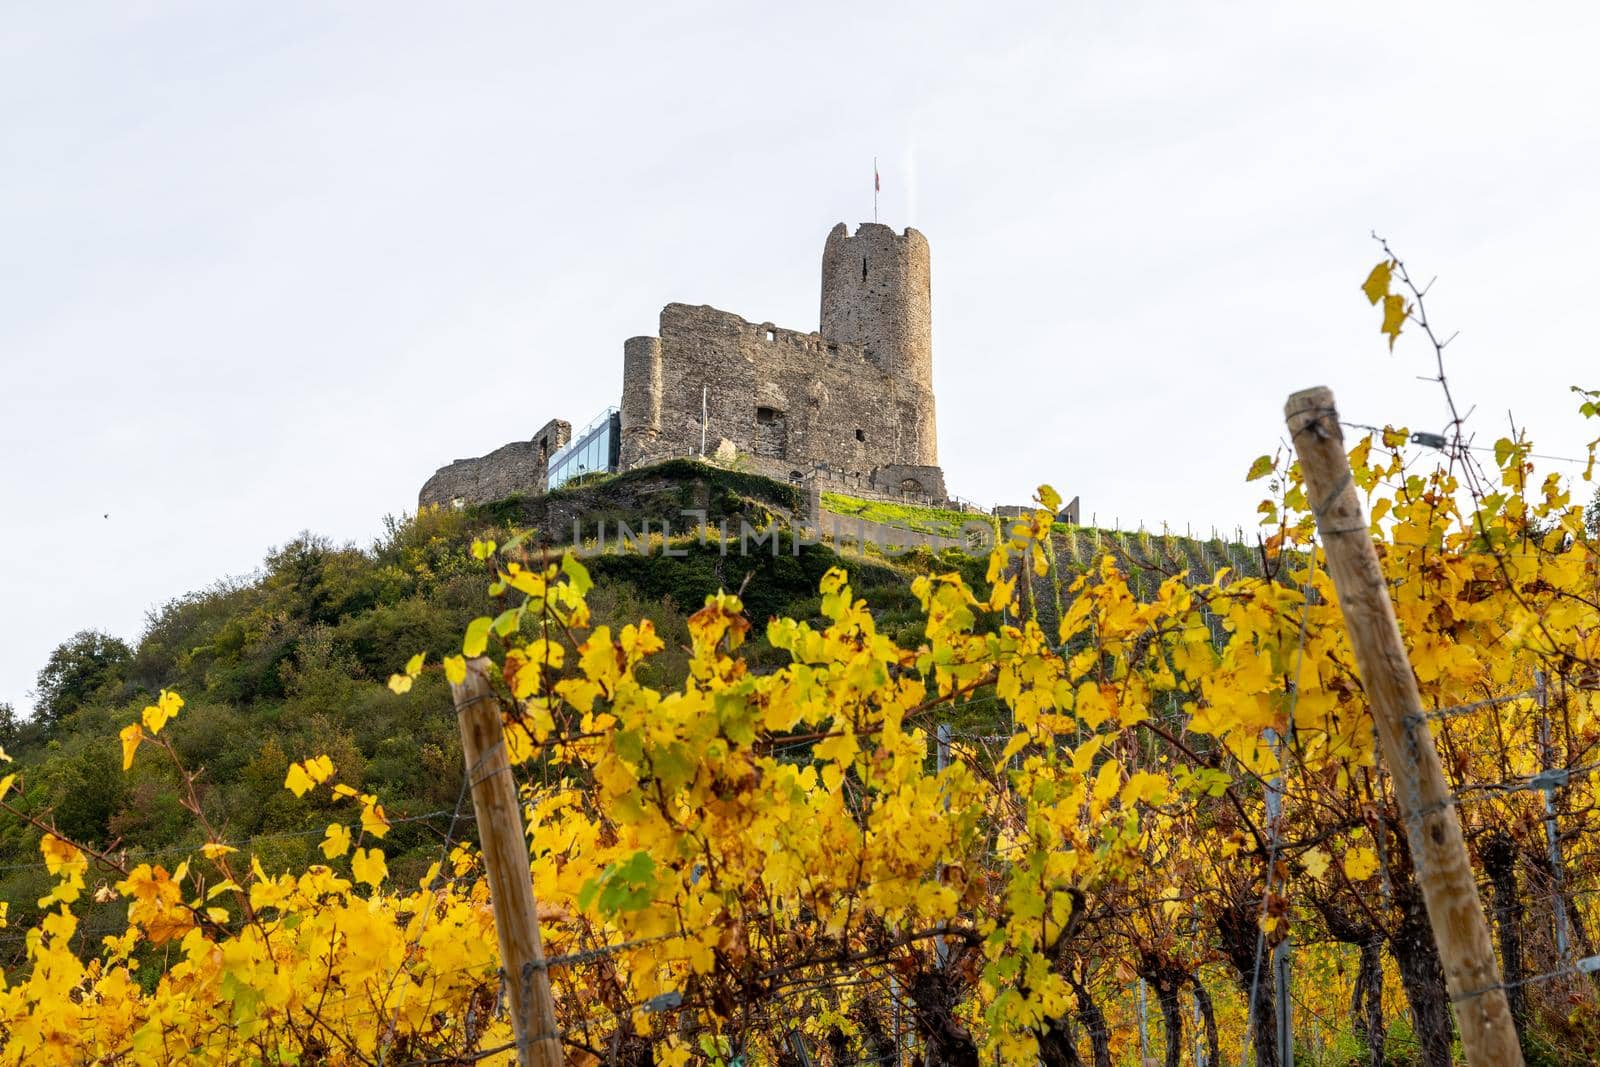 View at Landshut castle in Bernkastel-Kues on the river Moselle in autumn with multi colored vineyards  by reinerc